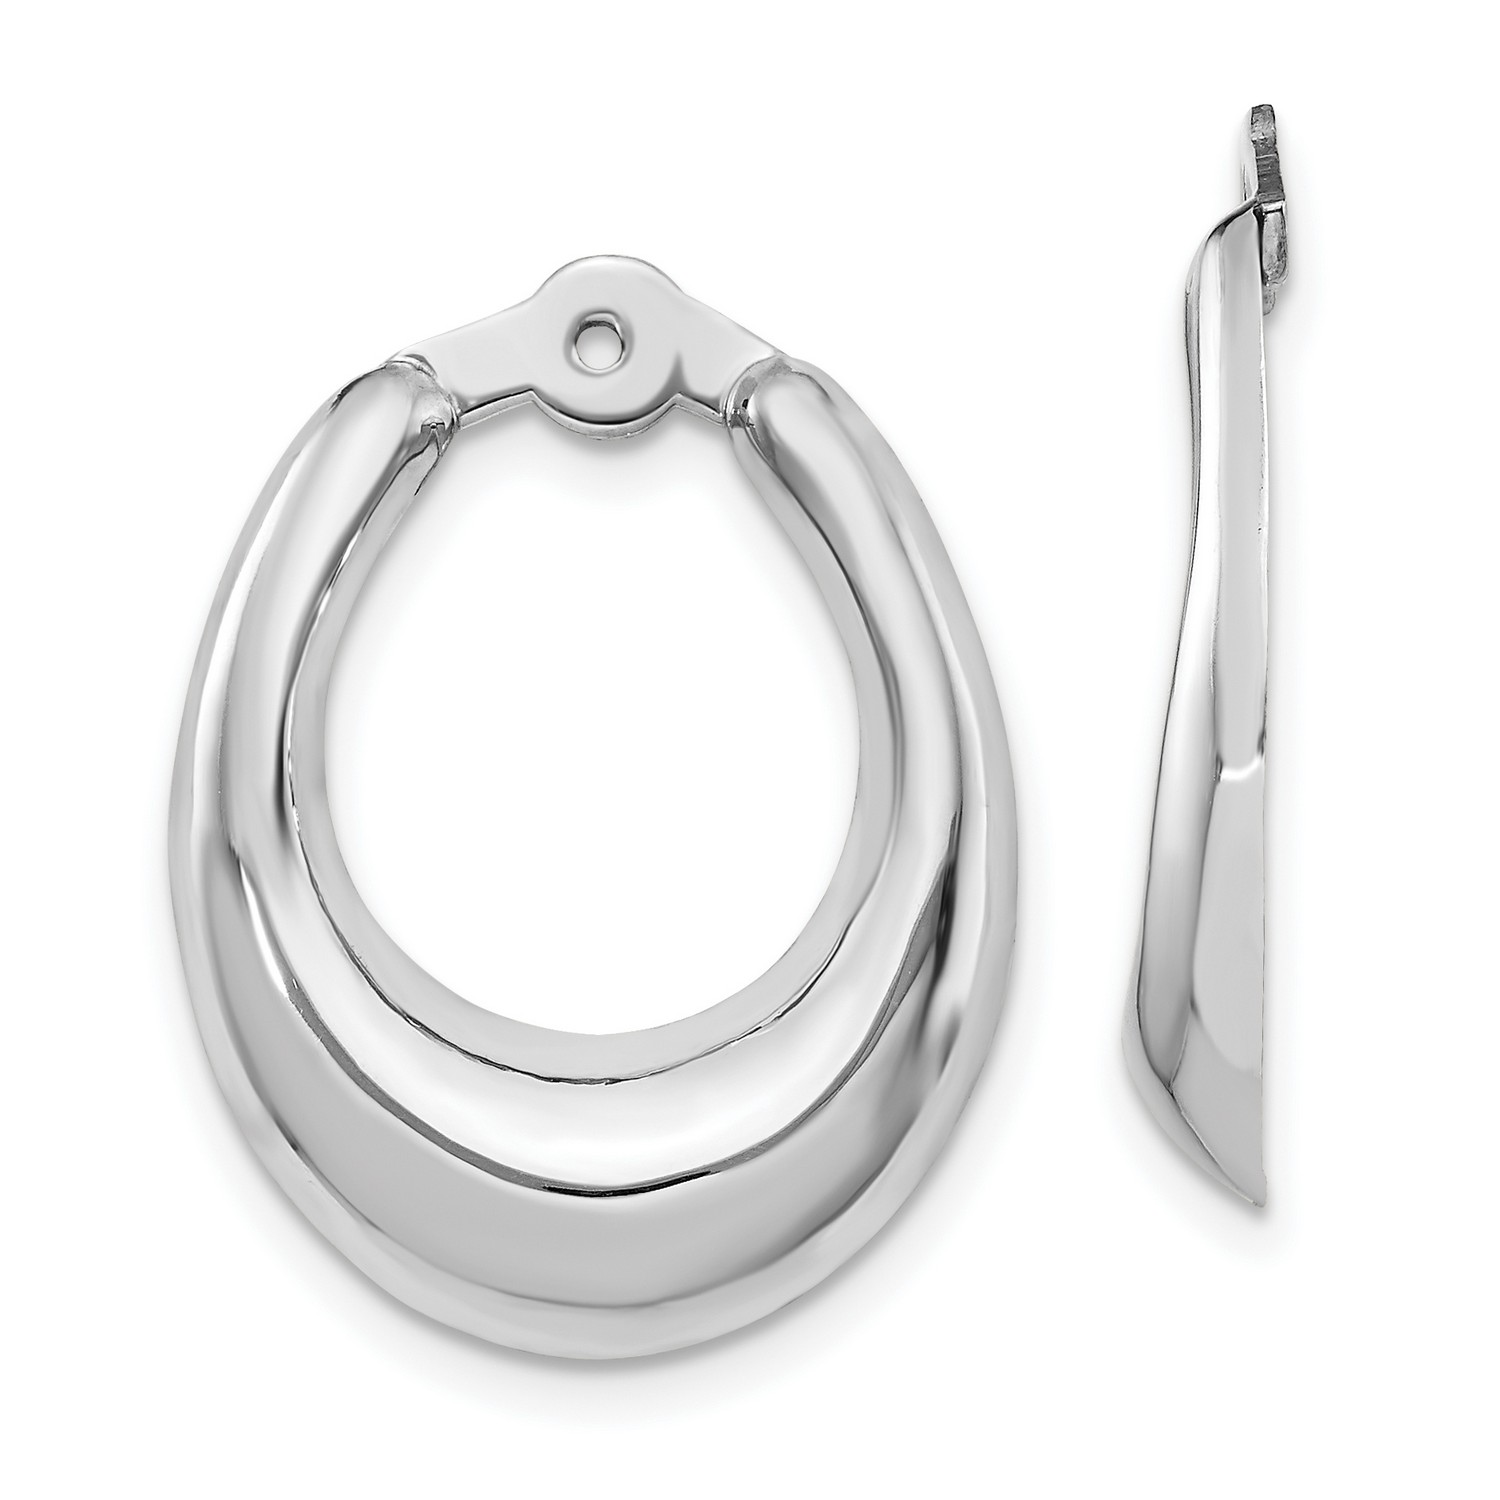 14k White Gold Polished Hoop Earring Jackets 25x18 mm - image 1 of 5